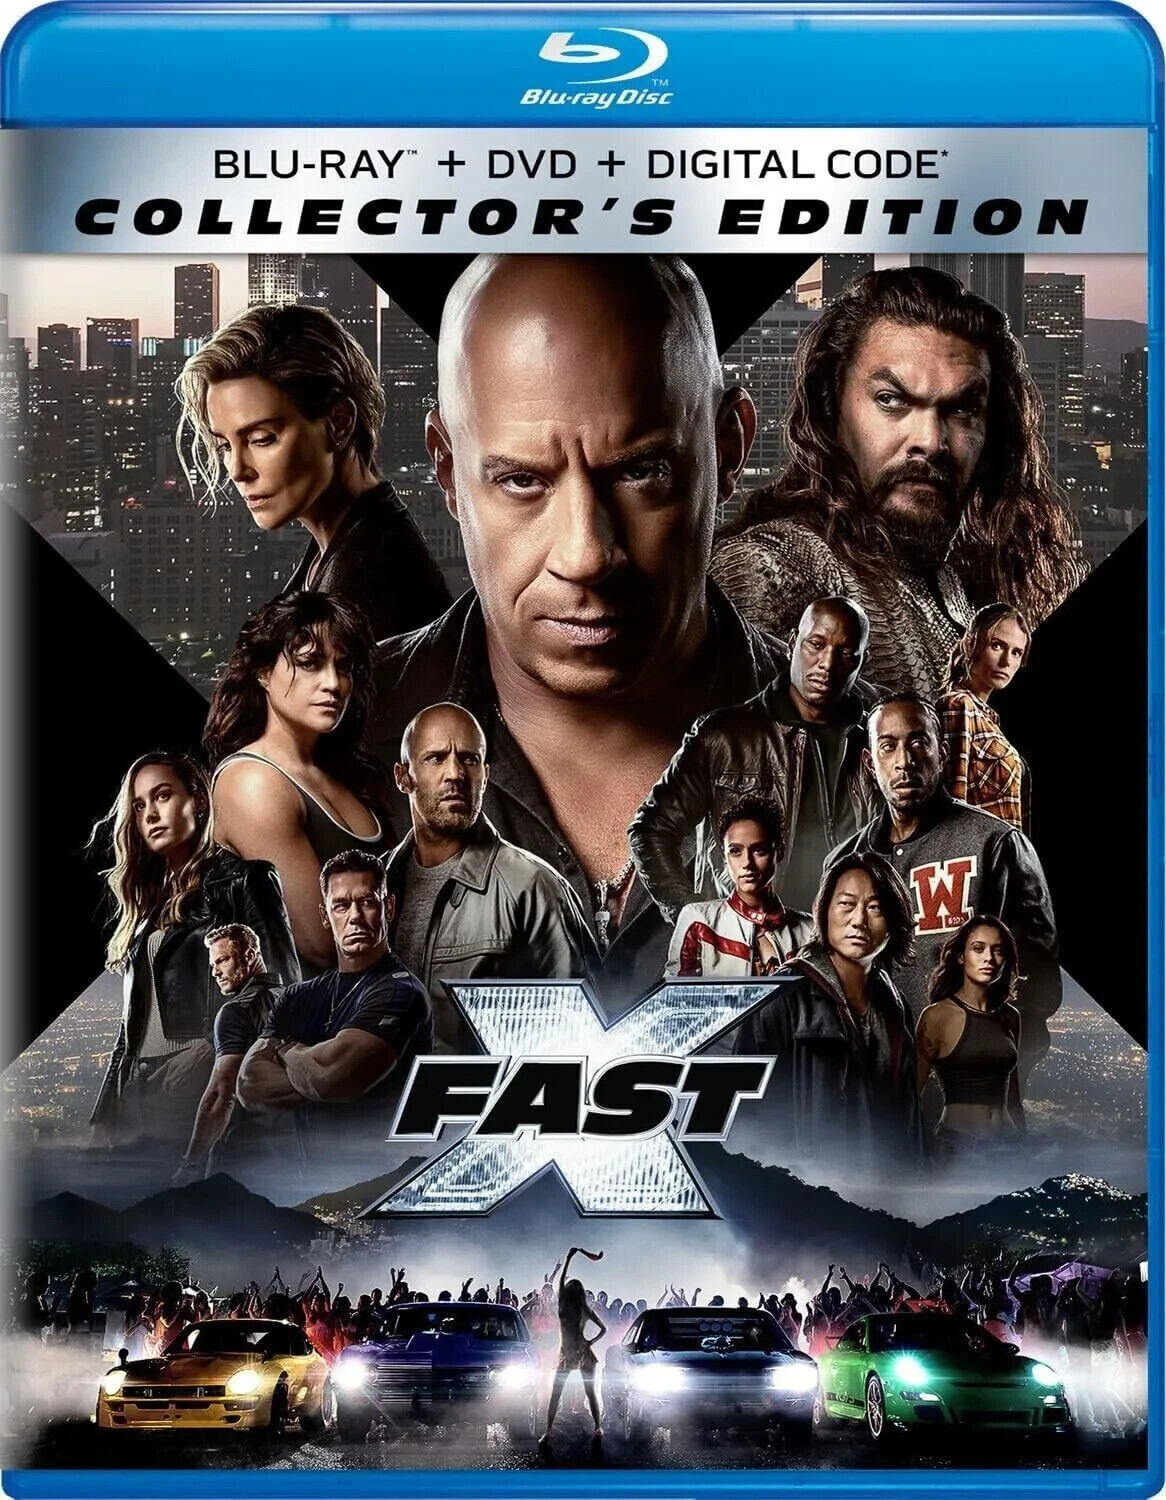 BRAND NEW Fast X part 10 Blu-ray + DVD + DIGITAL W/ SLIPCOVER Ships Today SEALED